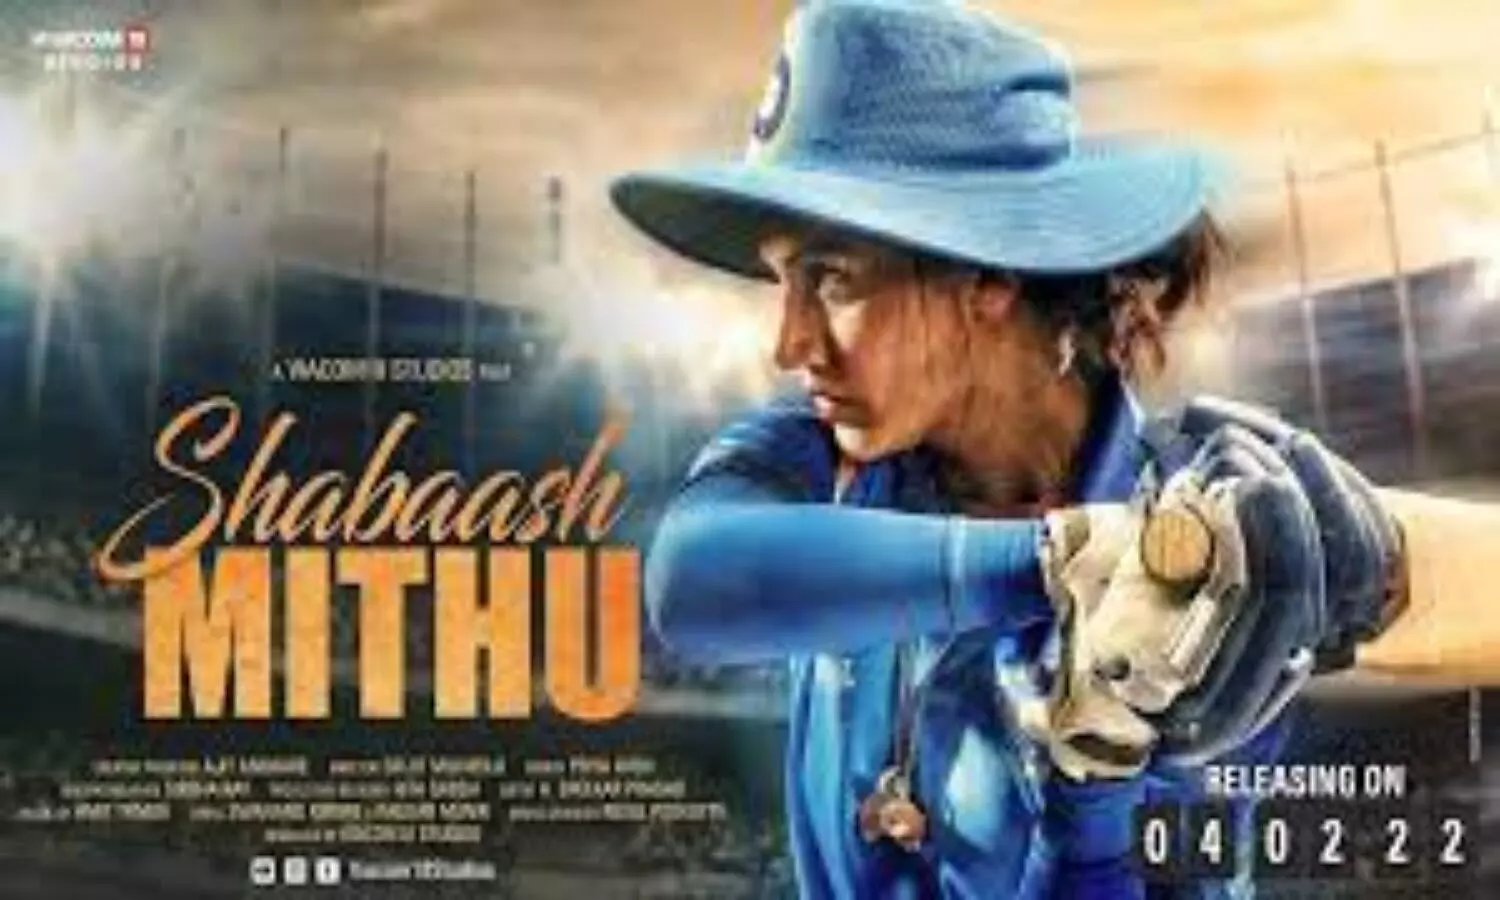 Shabaash Mithu Release Date